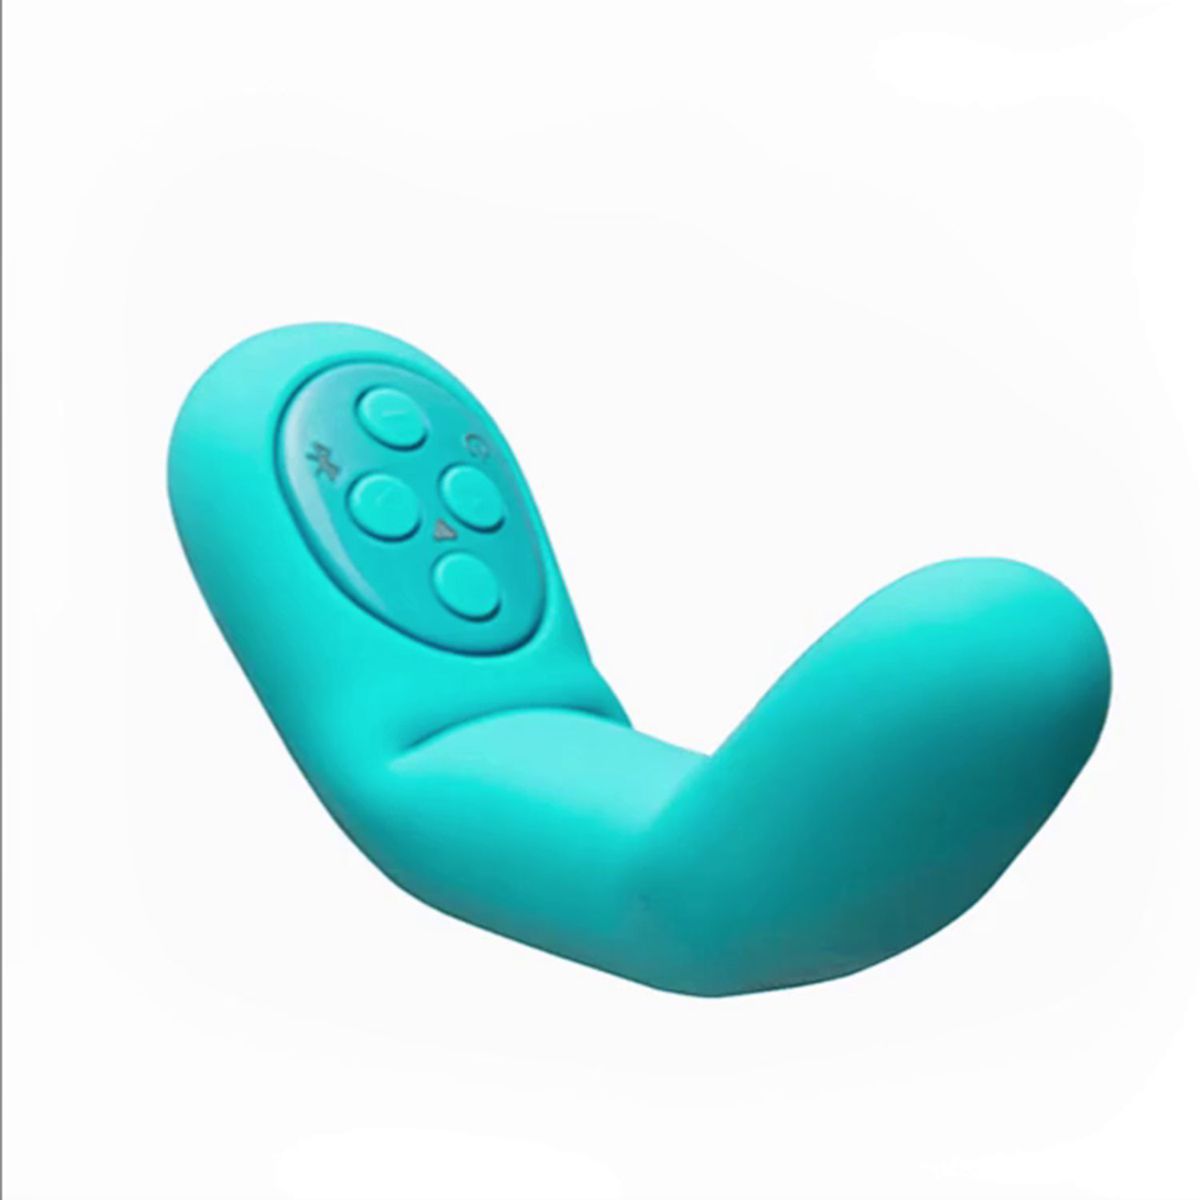 VIBRATOR THAT FITS IN YOUR PALM